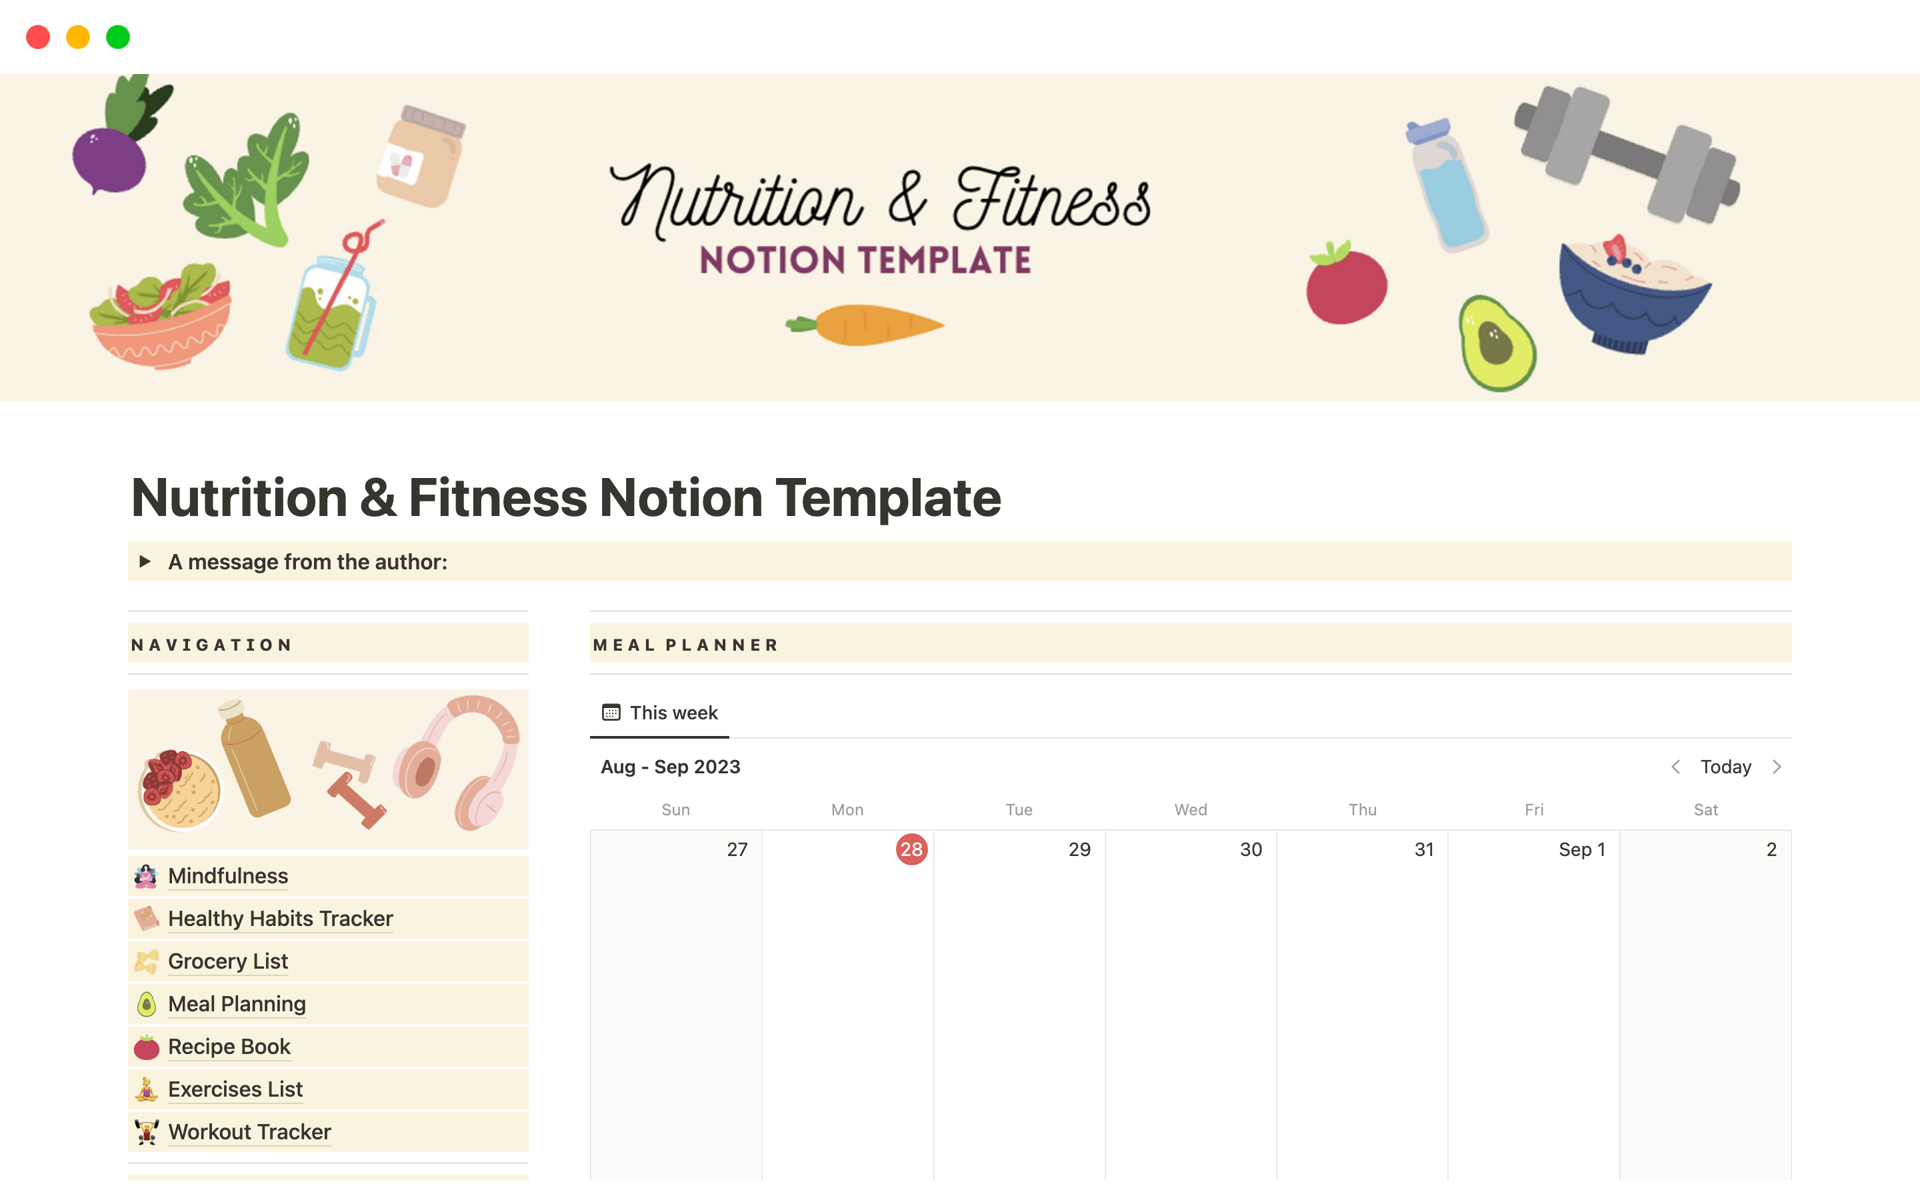 This template will help you manage, plan and organize everything related to your diet, exercise, and healthy habits.